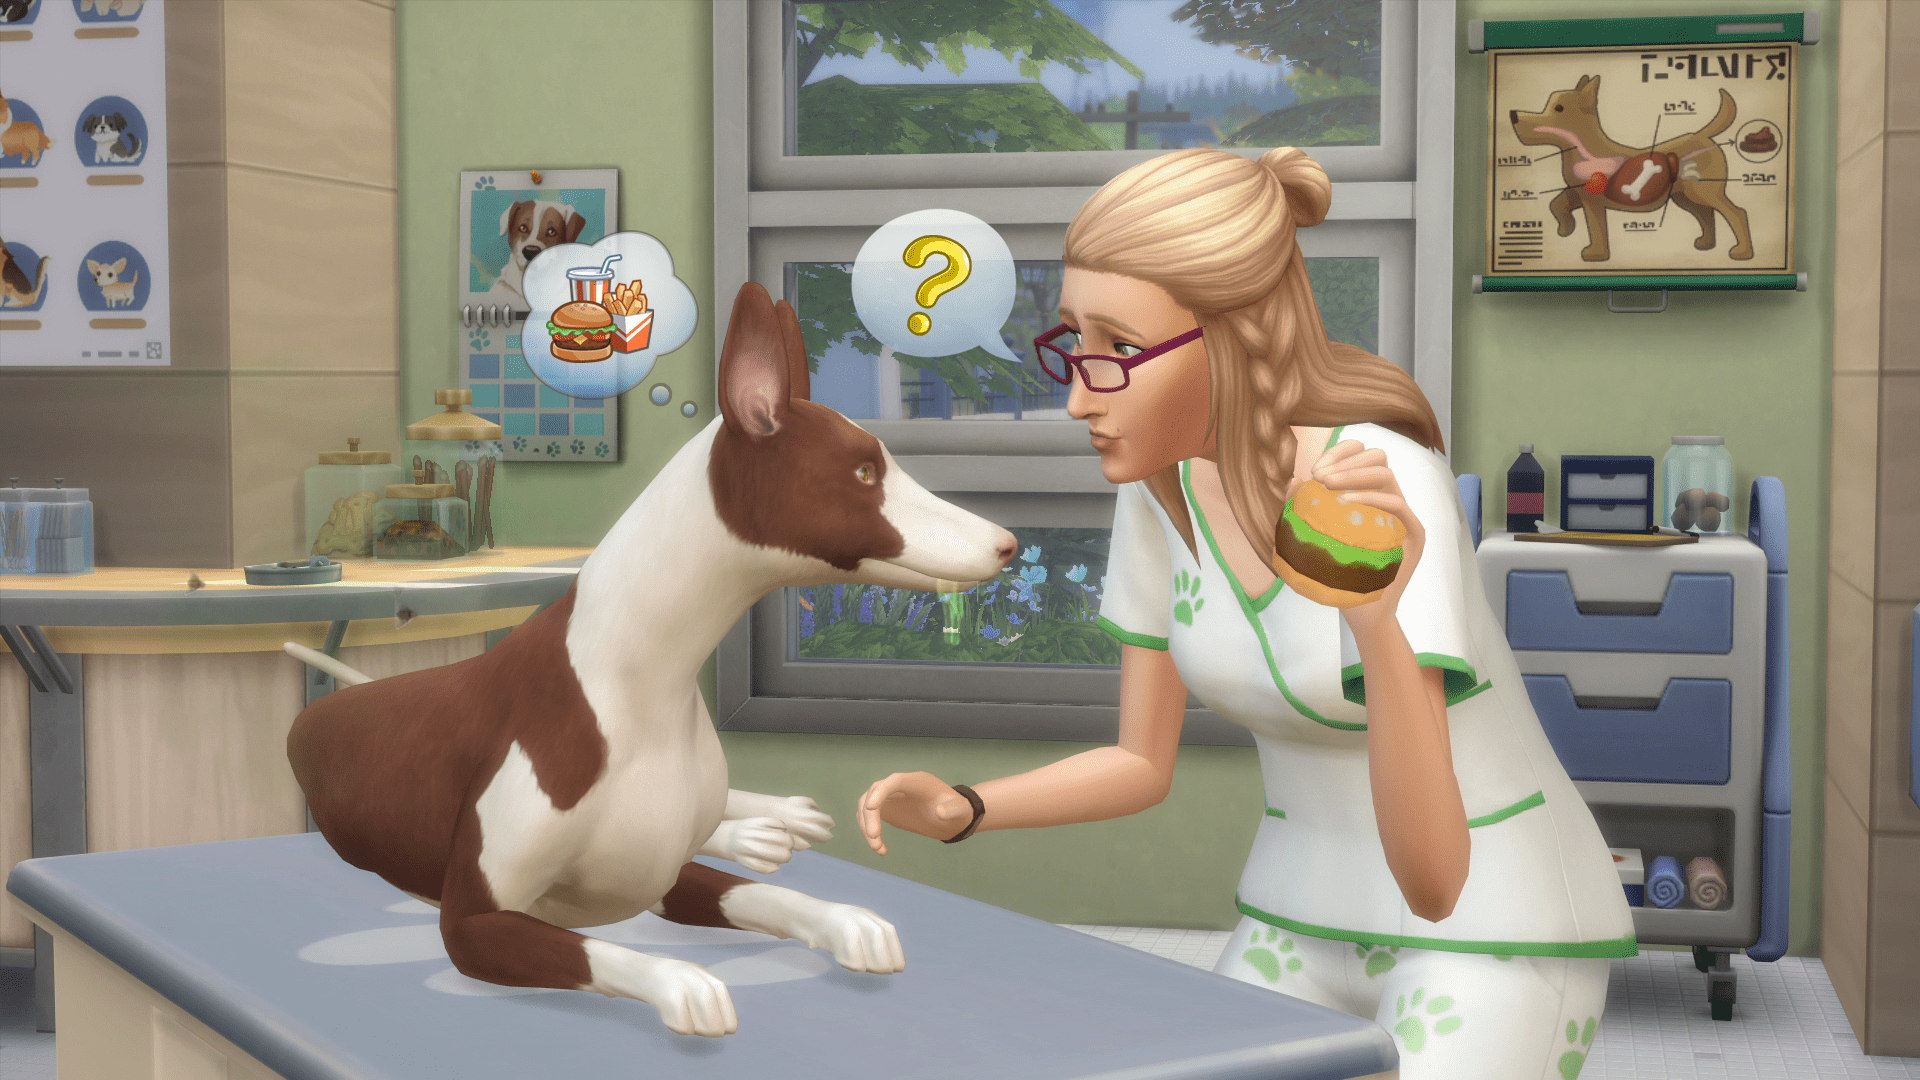 the sims 4 cats and dogs cheap